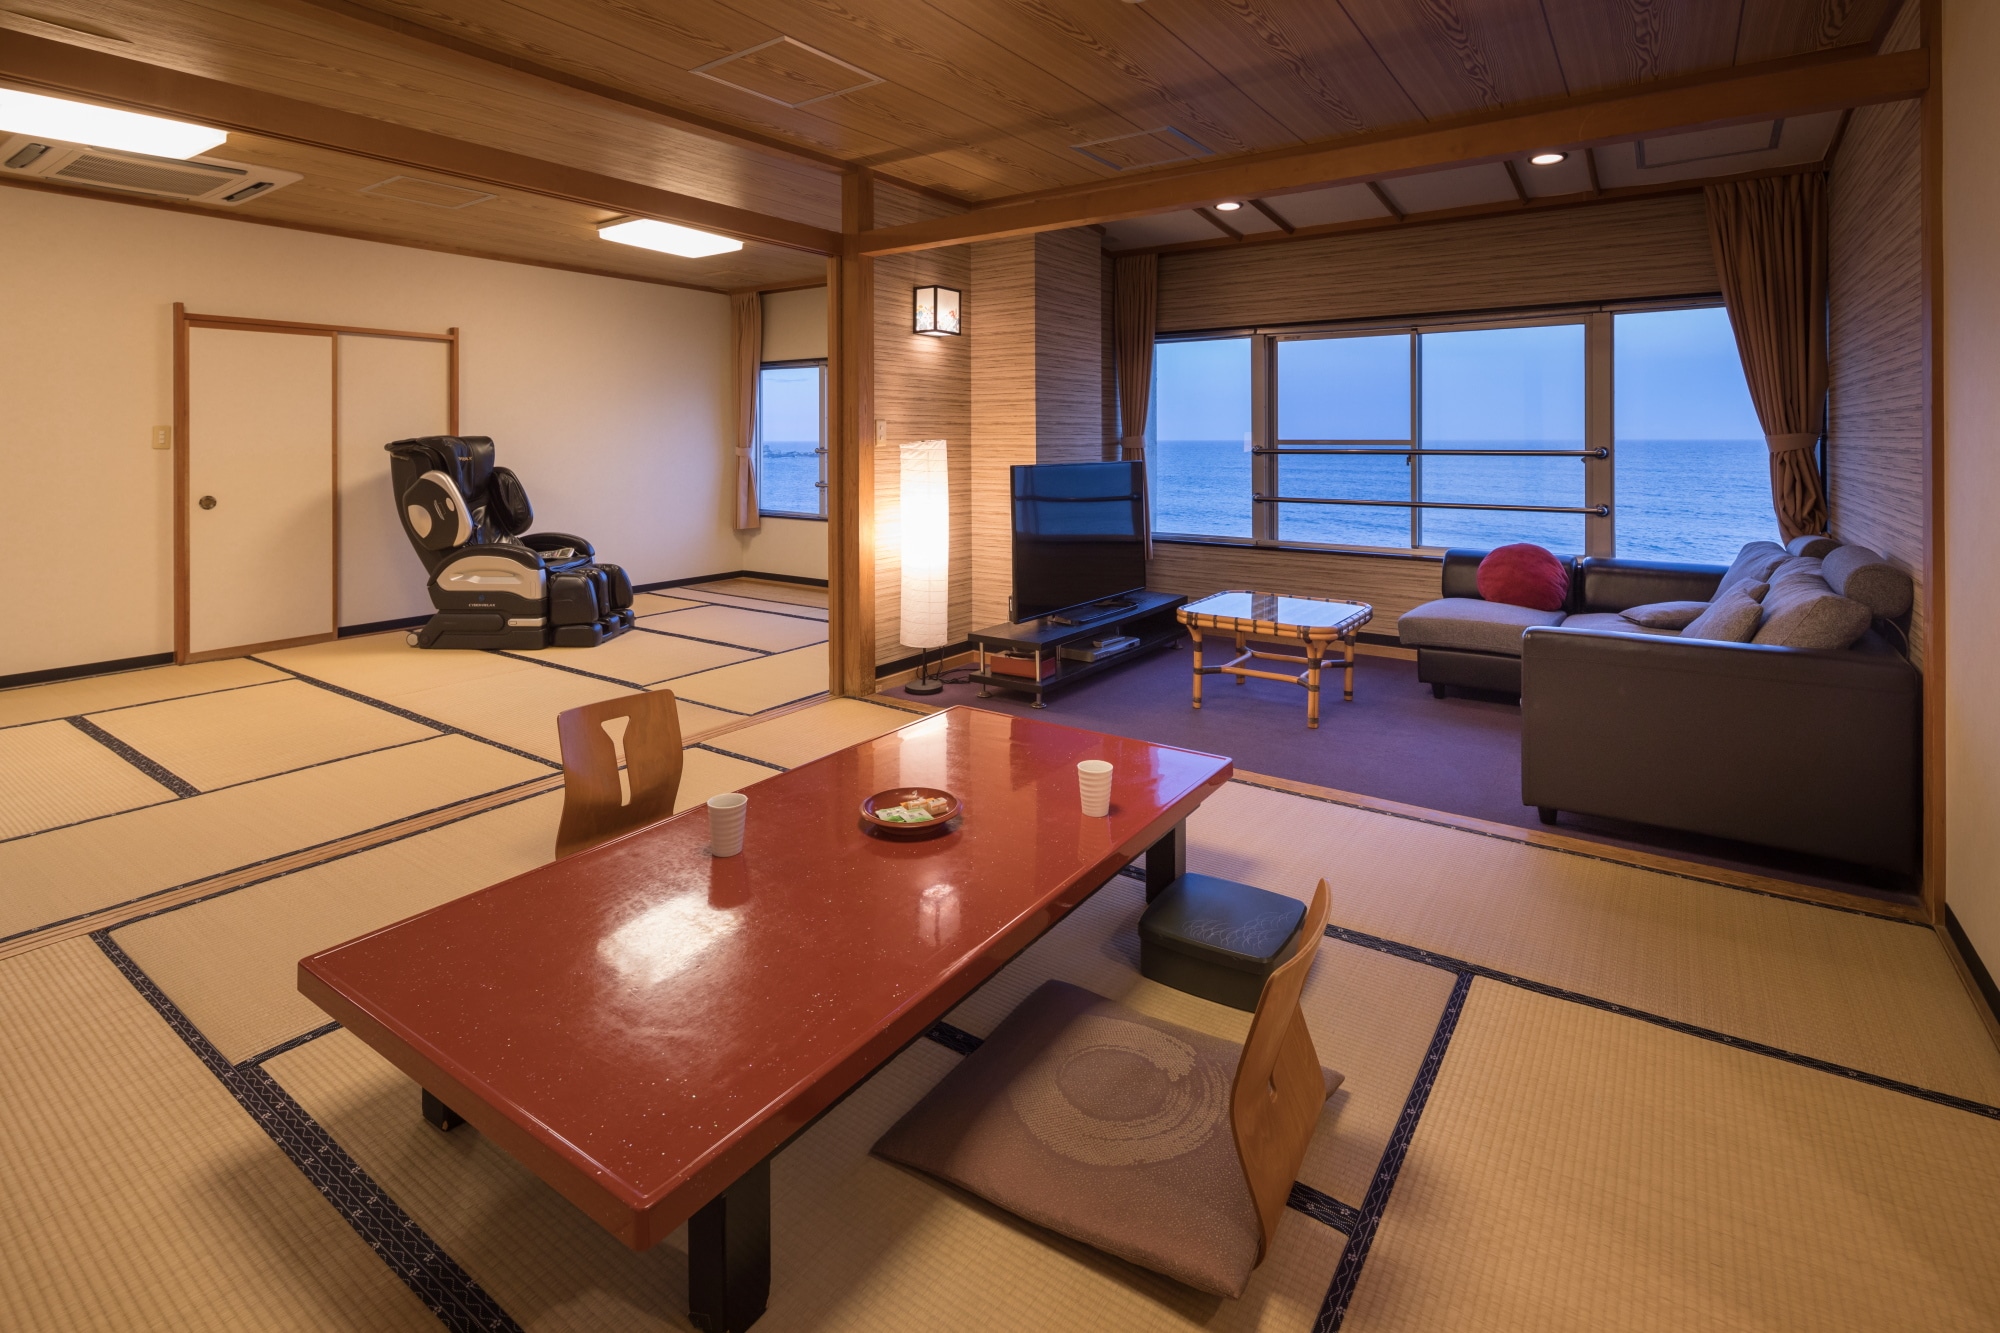 An example of a guest room: A large Japanese-style room overlooking the Pacific Ocean